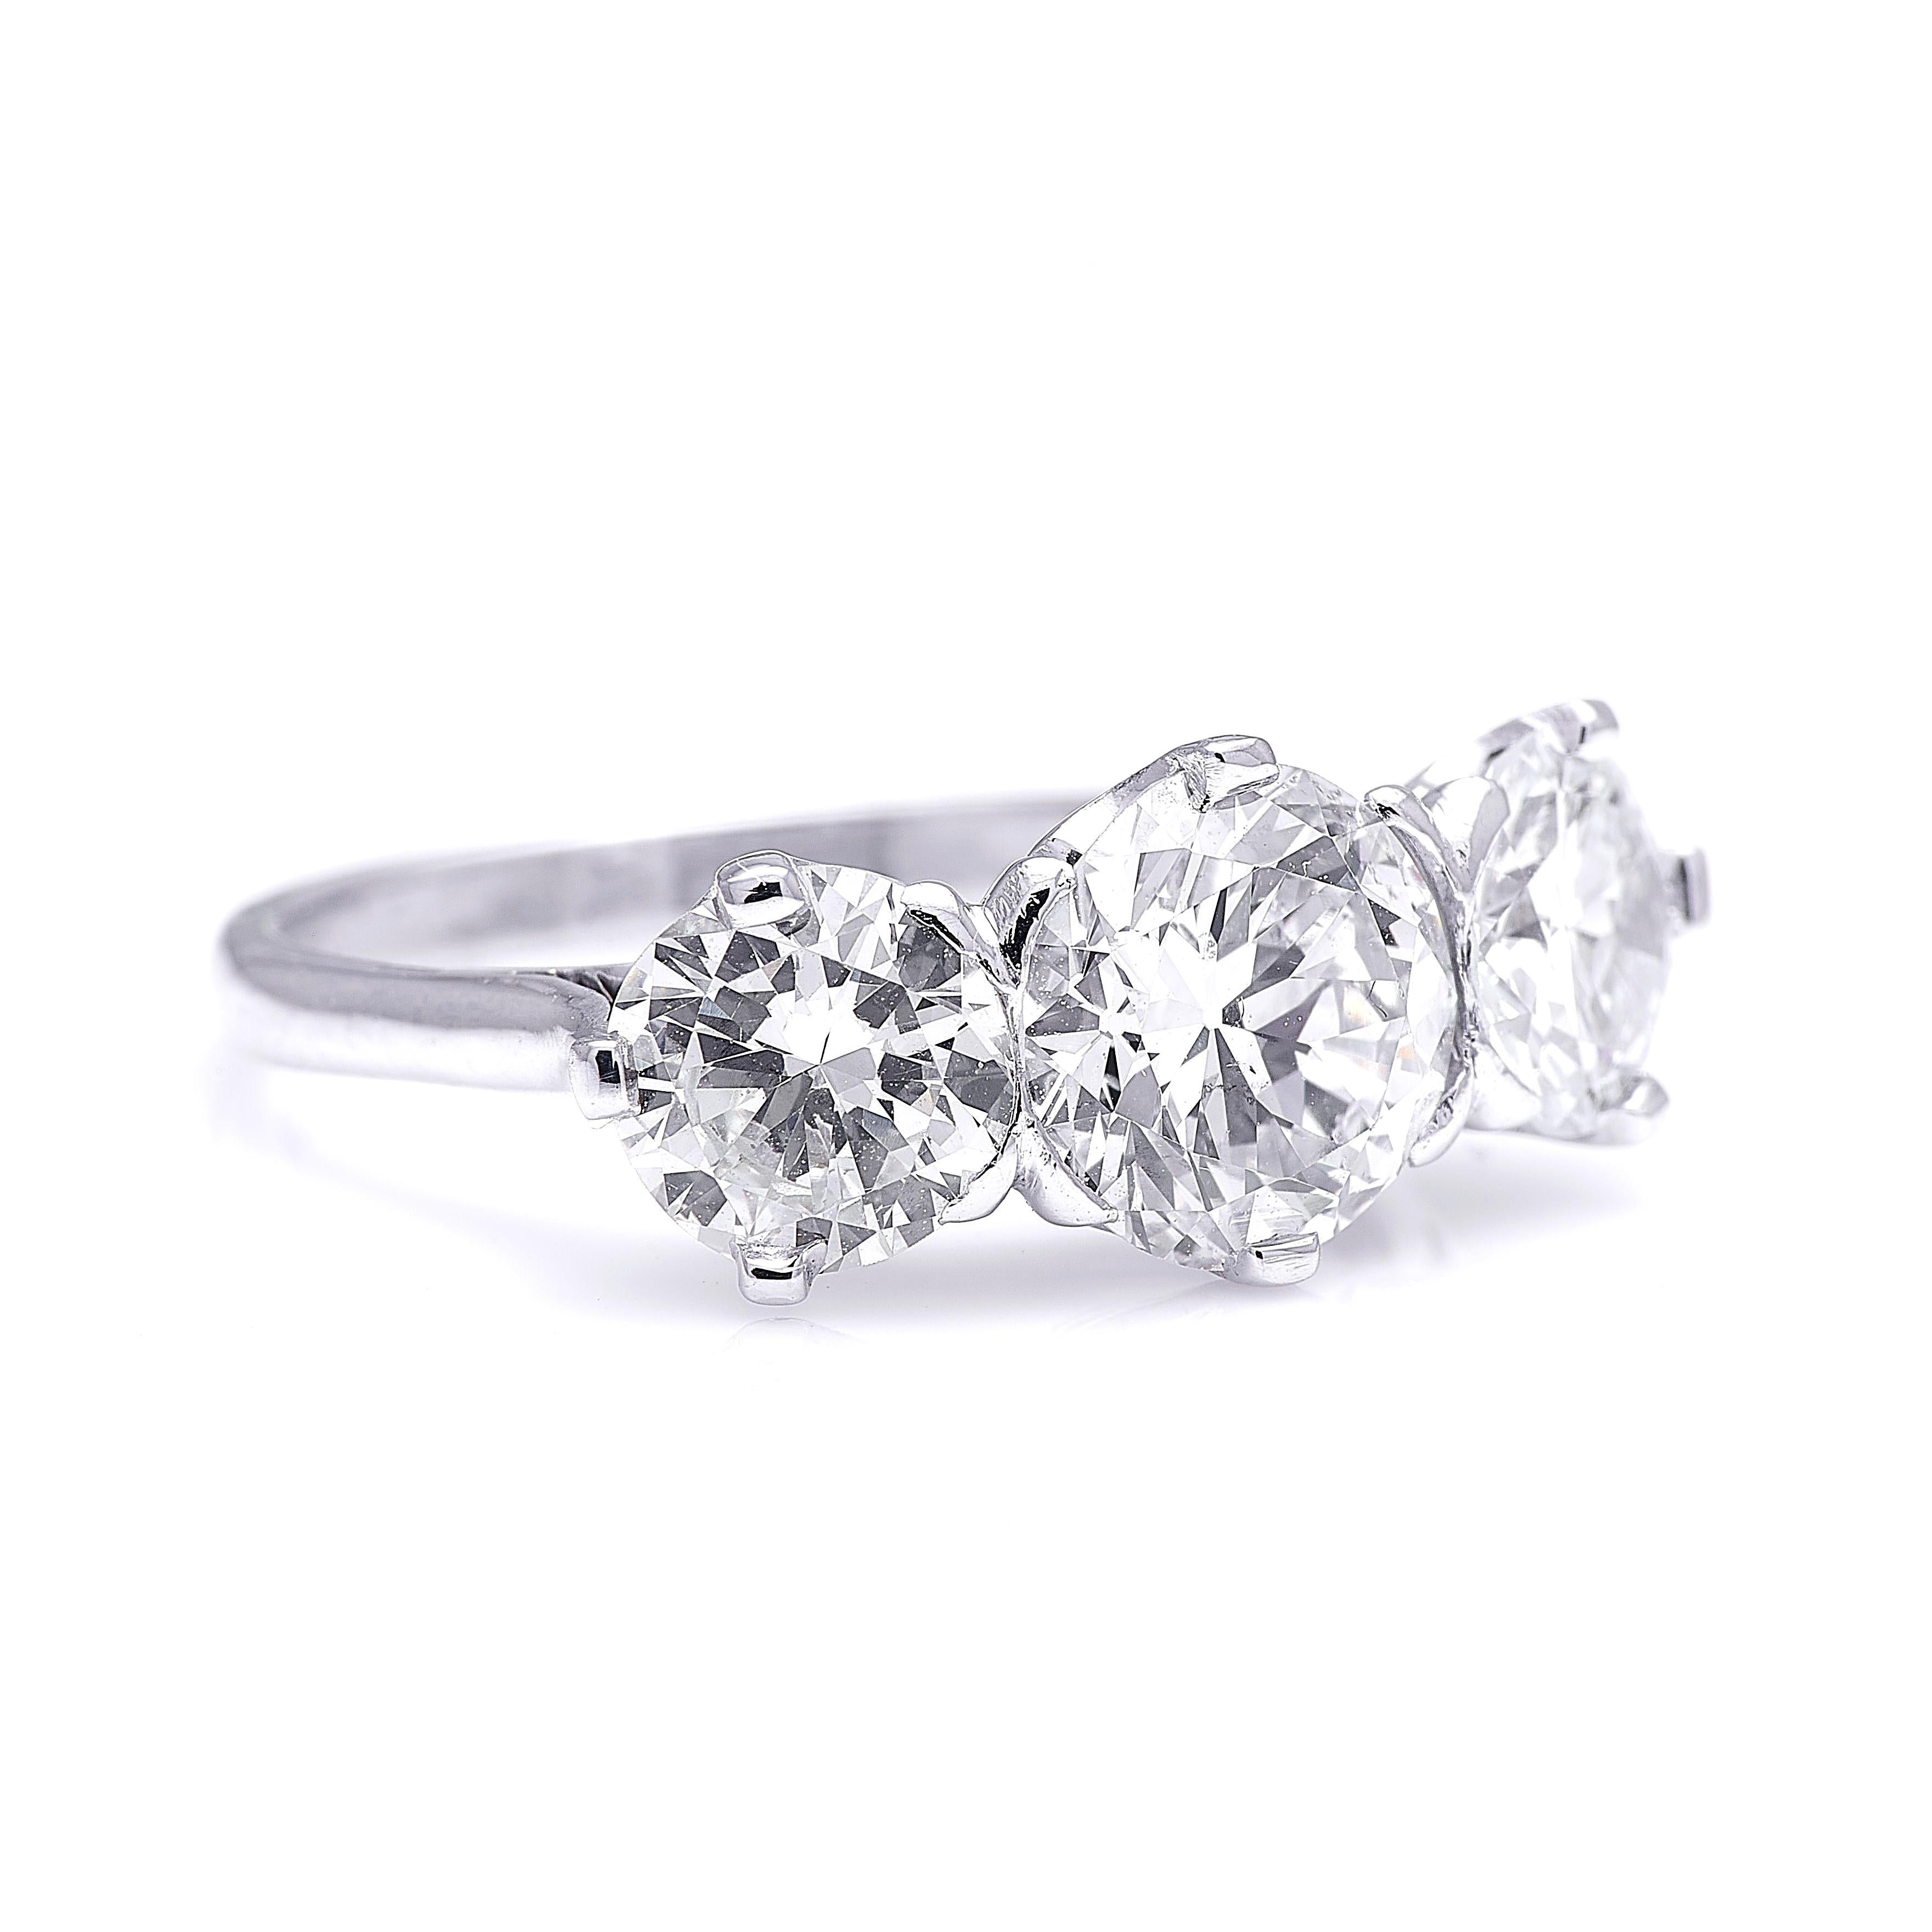 Diamond trilogy ring, mid 20th century. This classic three-stone diamond ring is set with a substantial trio of early to mid-20th century circular-cut diamonds. With a centre stone weighing approximately 1.40 carats, and shoulder stones each